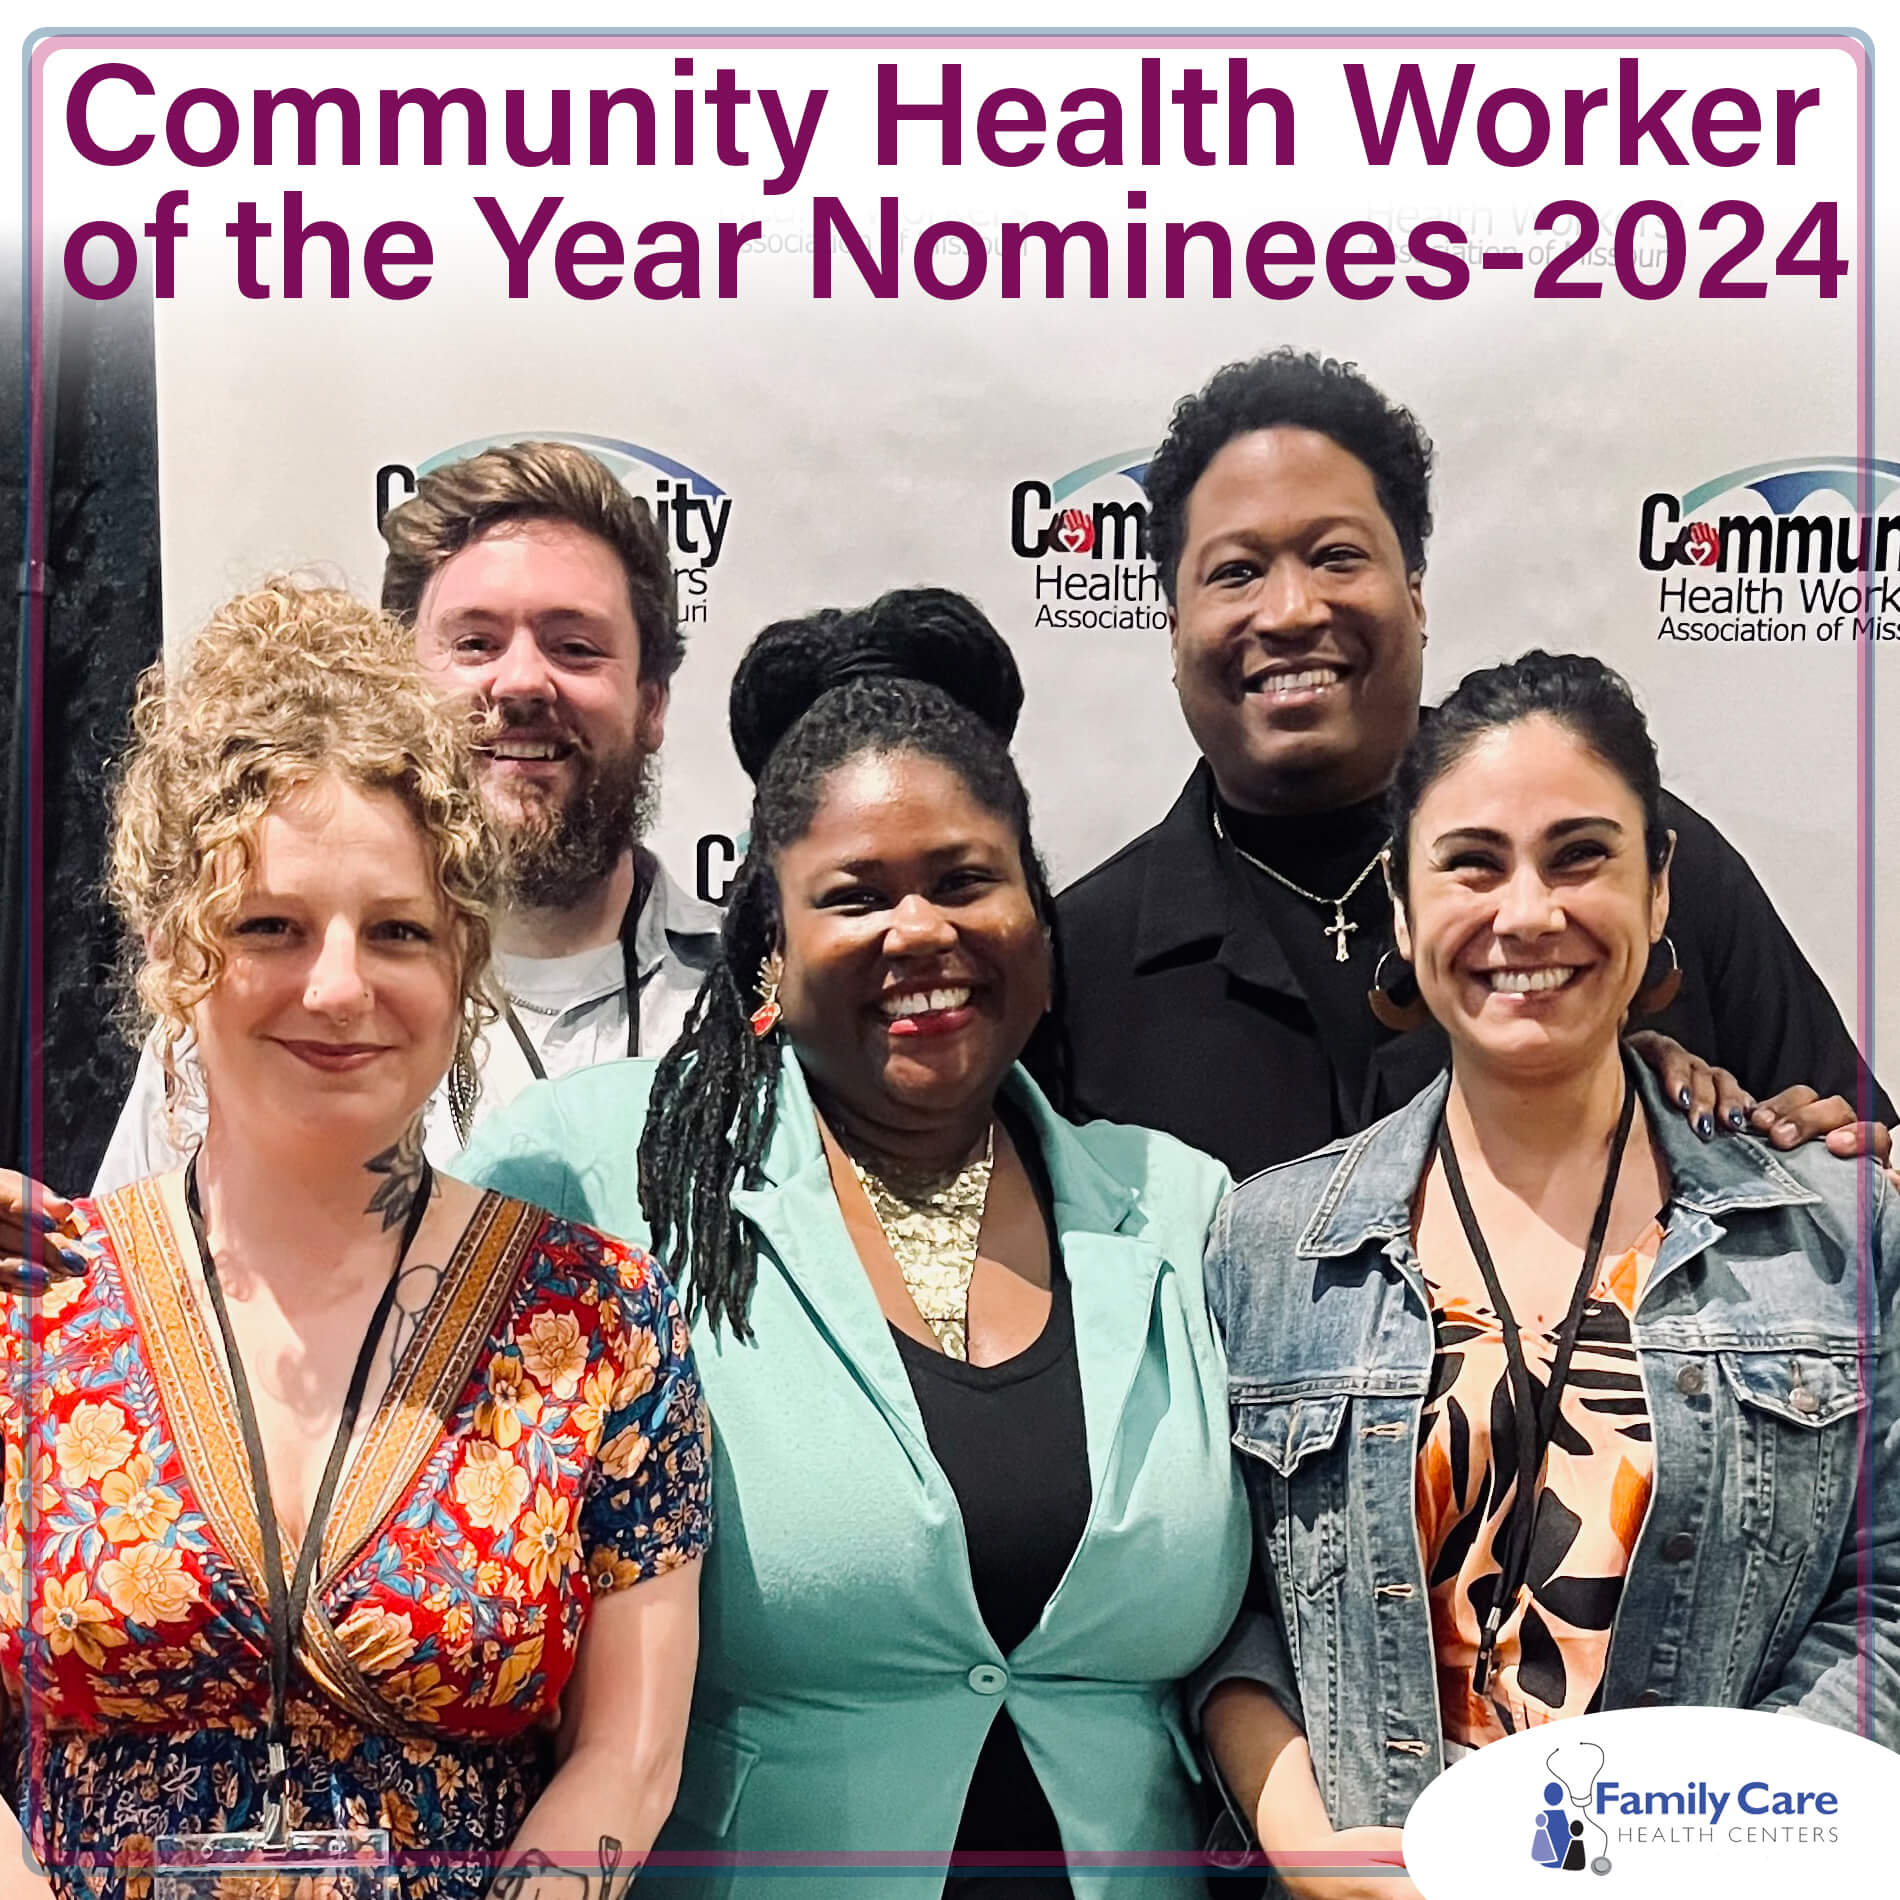 Family Care Health Centers Community Health Workers of the Year Nominees for 2024